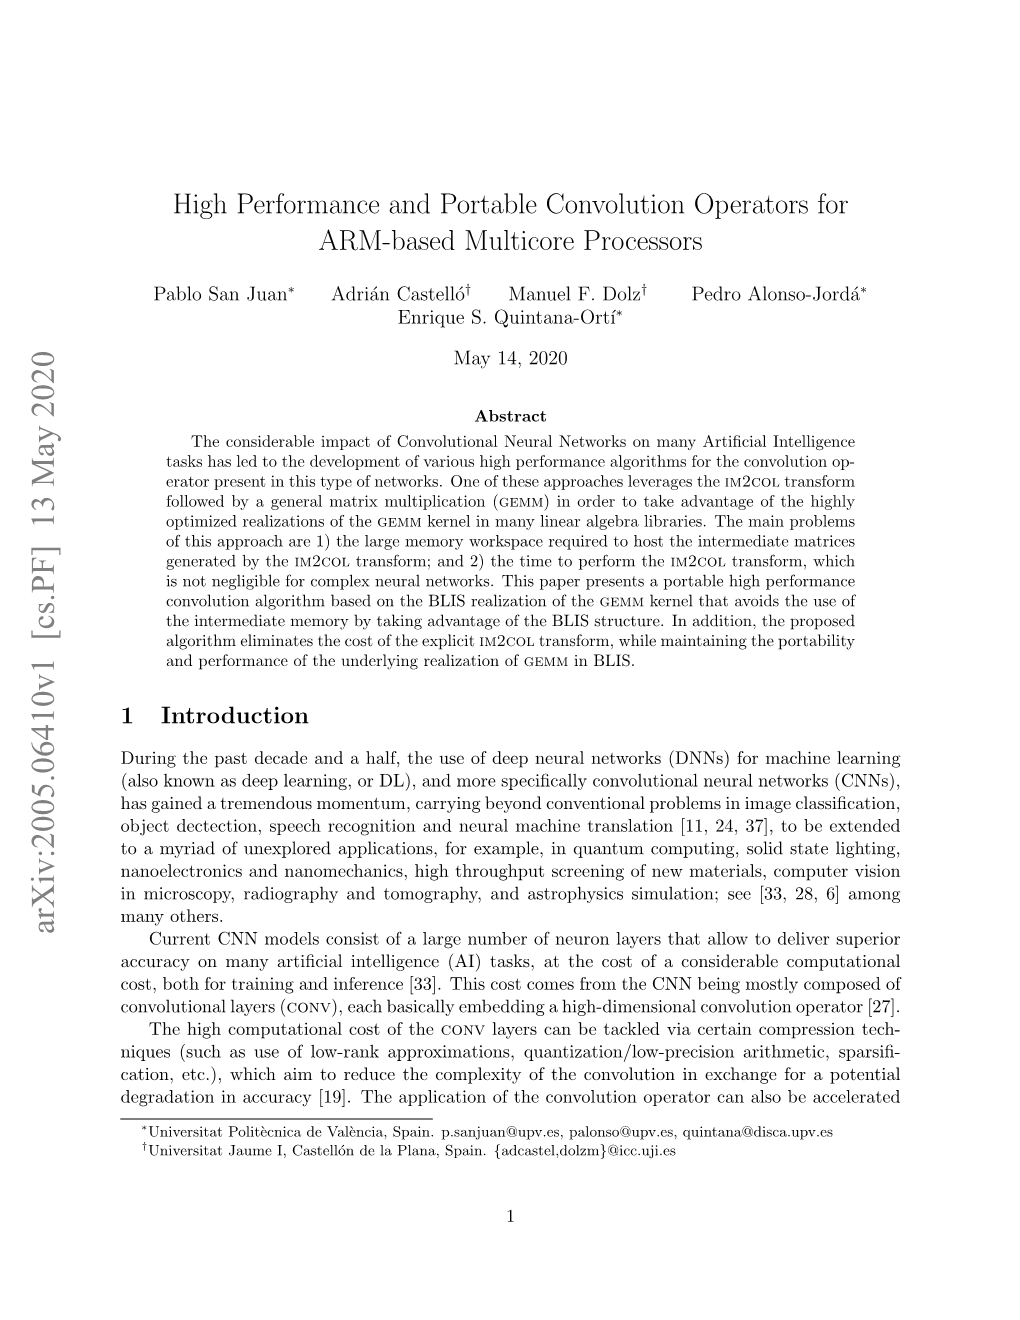 High Performance and Portable Convolution Operators for ARM-Based Multicore Processors